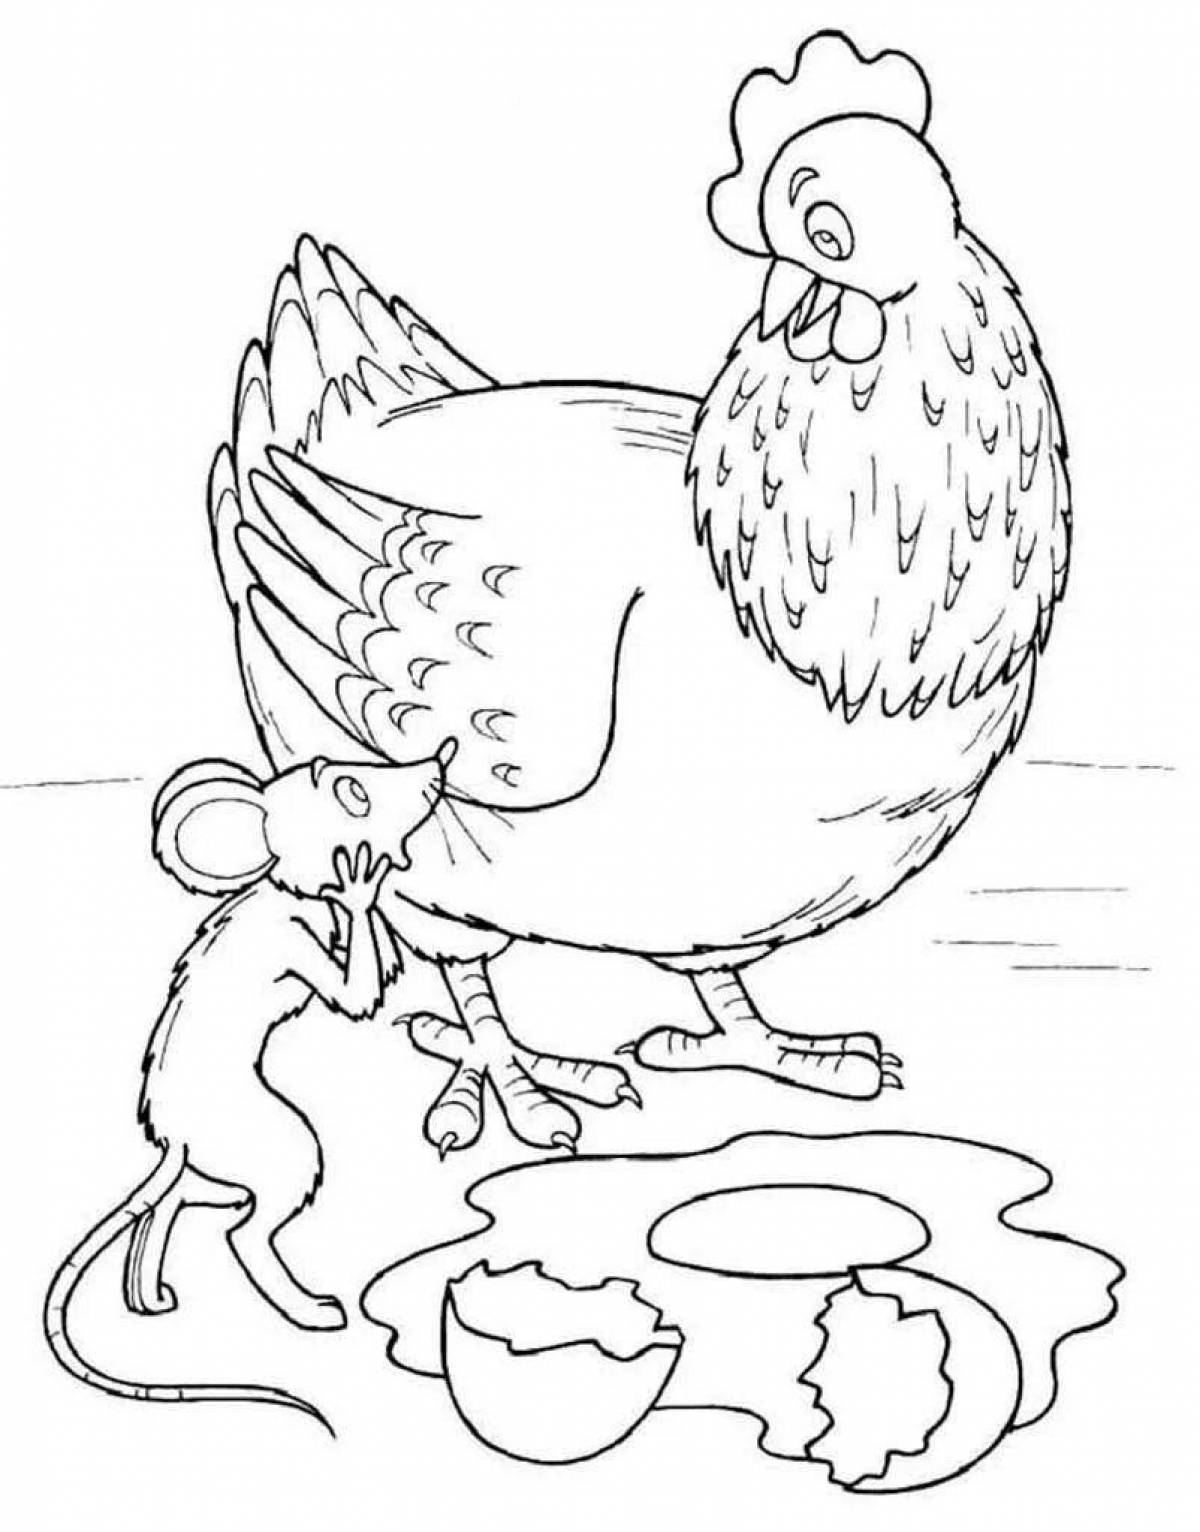 Heroic coloring pages heroes of Russian folk tales